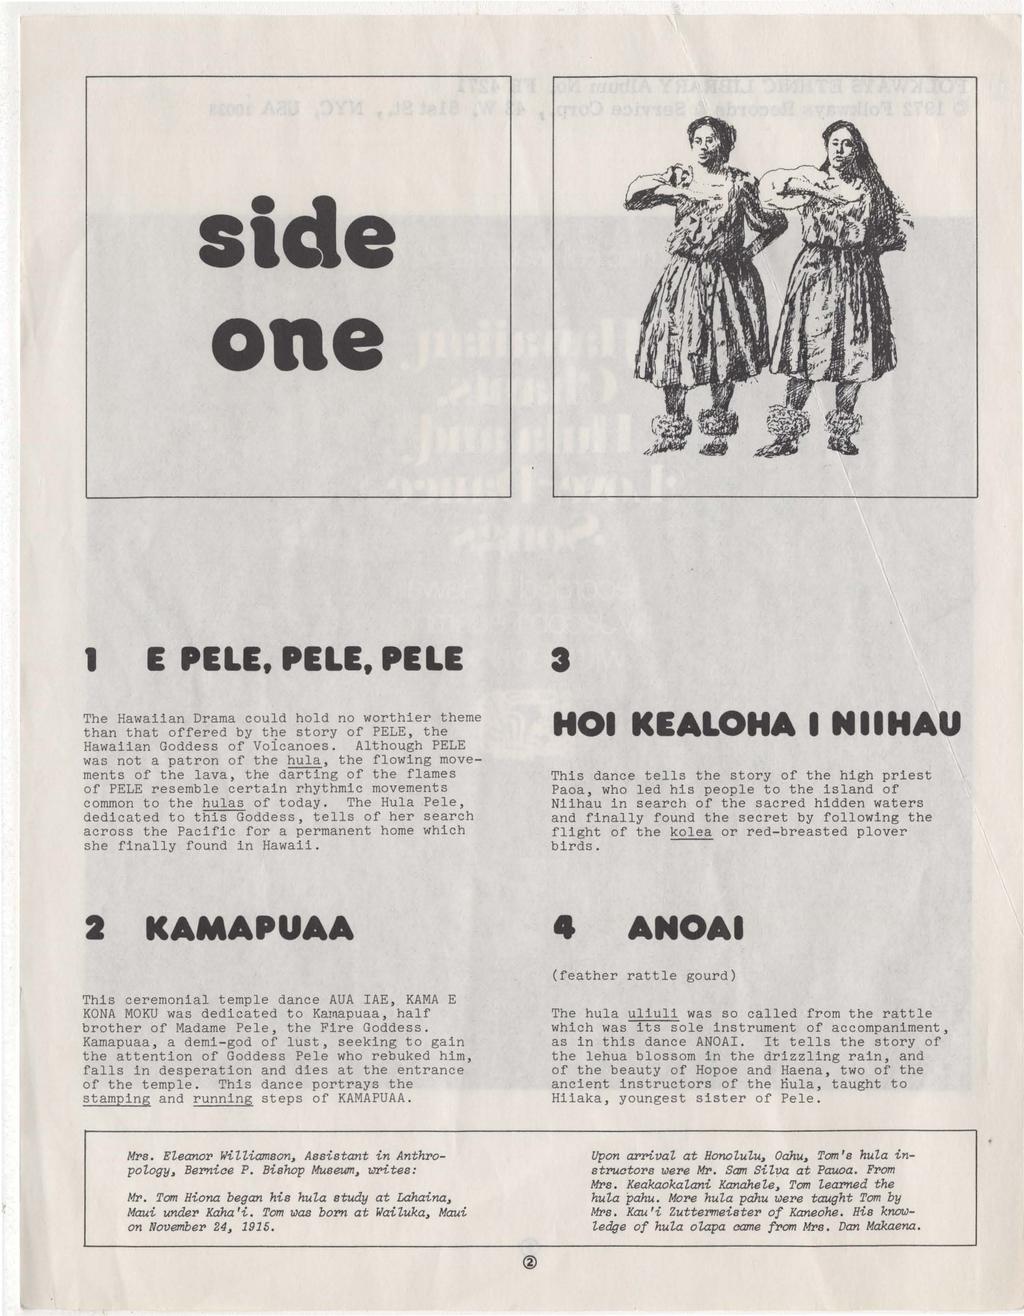 side one 1 E PELE,PELE,PELE The Hawaiian Drama could hold no worthier theme than that offered by the story of PELE, the Hawaiian Goddess of Voicanoes.